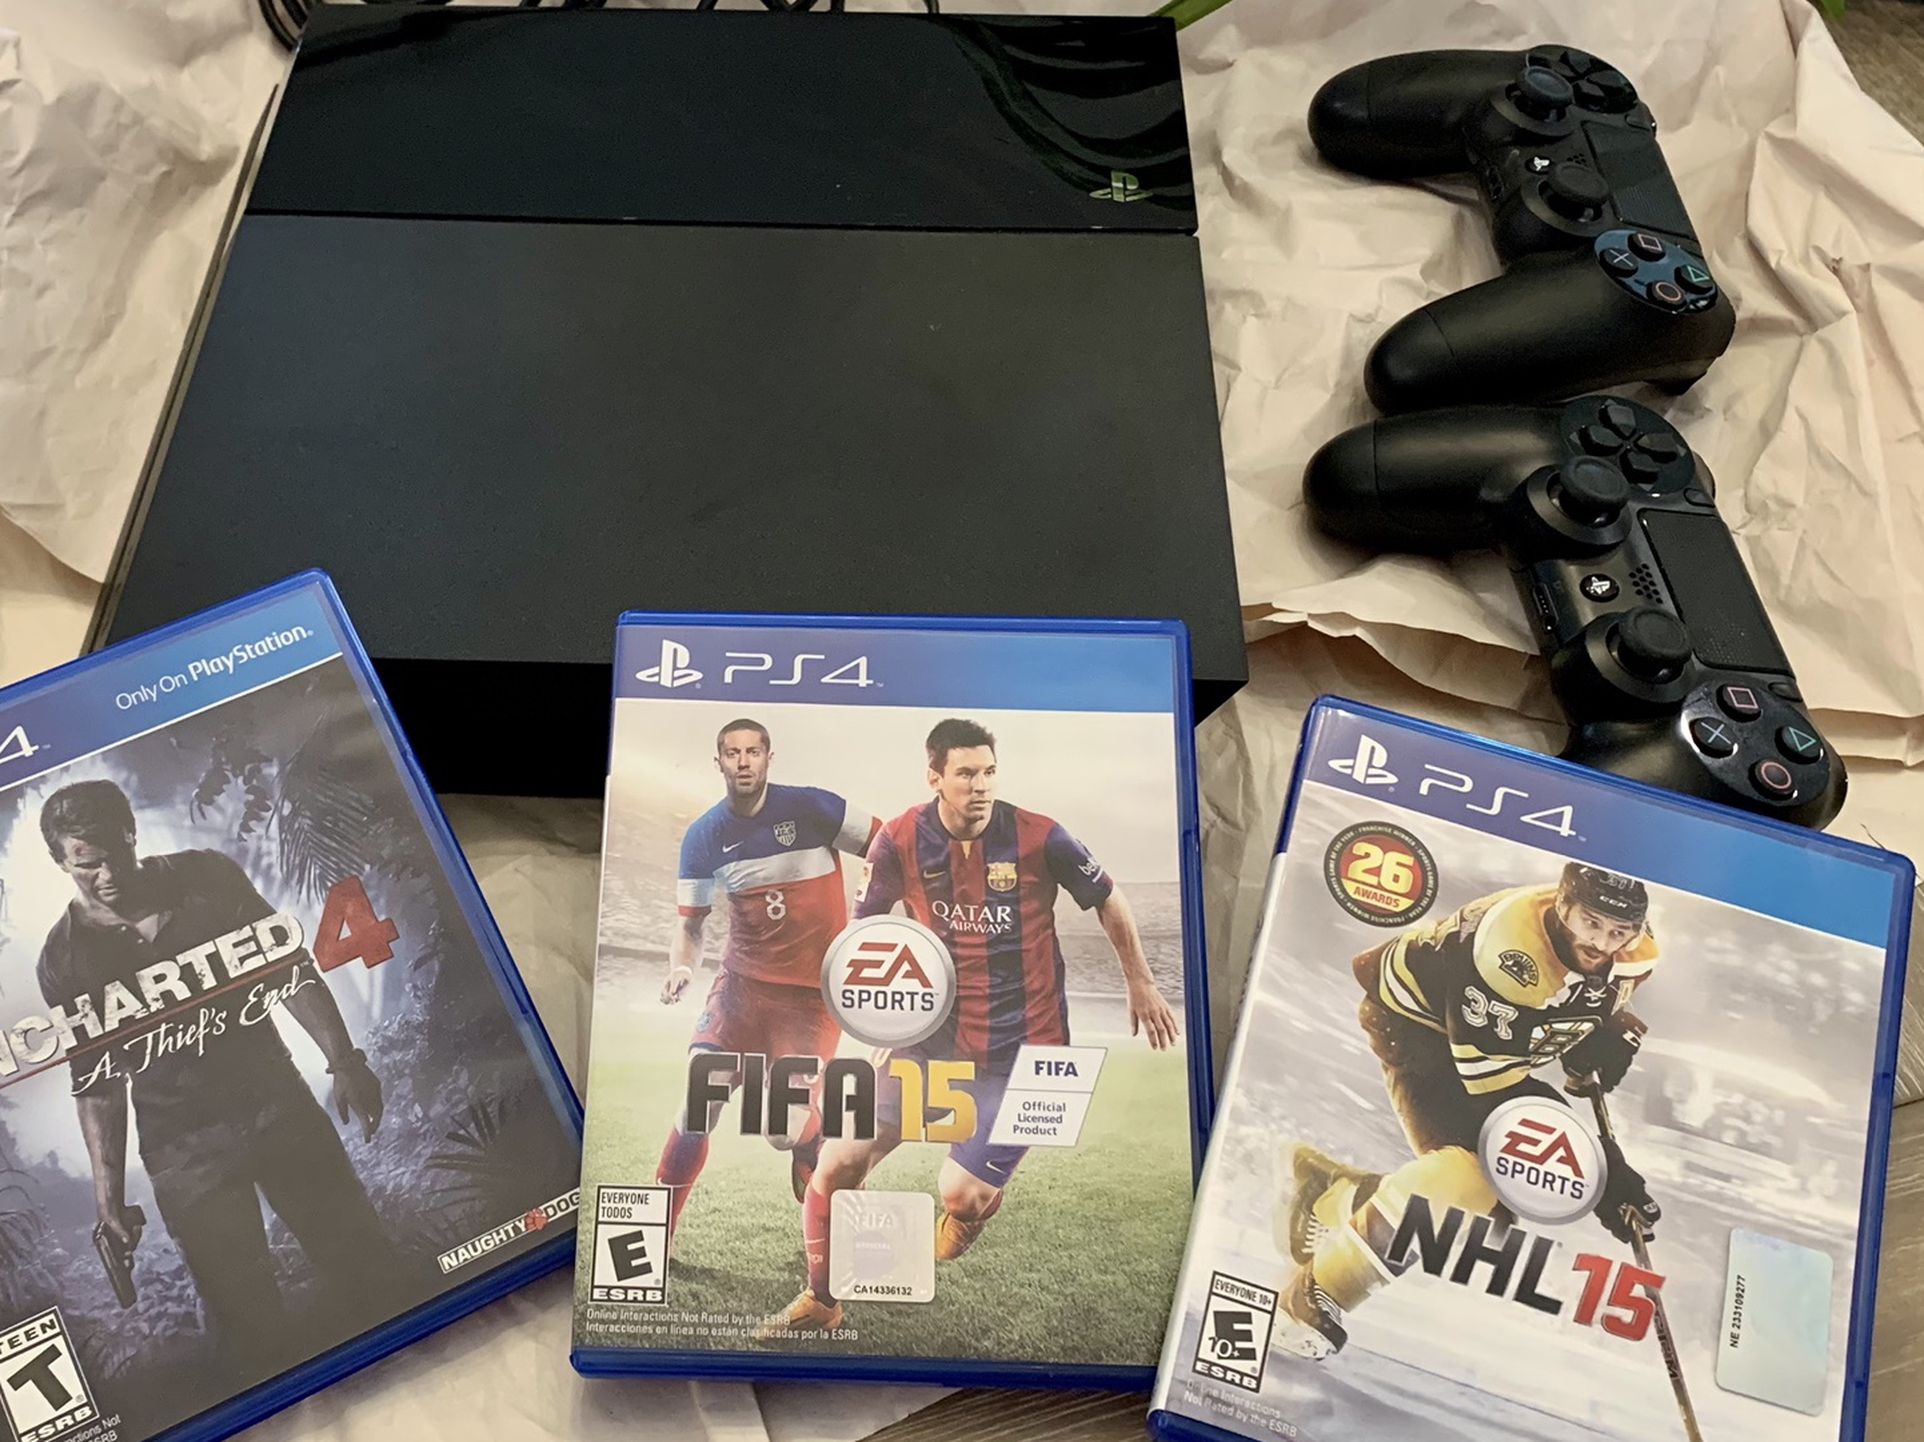 PS4 - Never Used With 3 Games